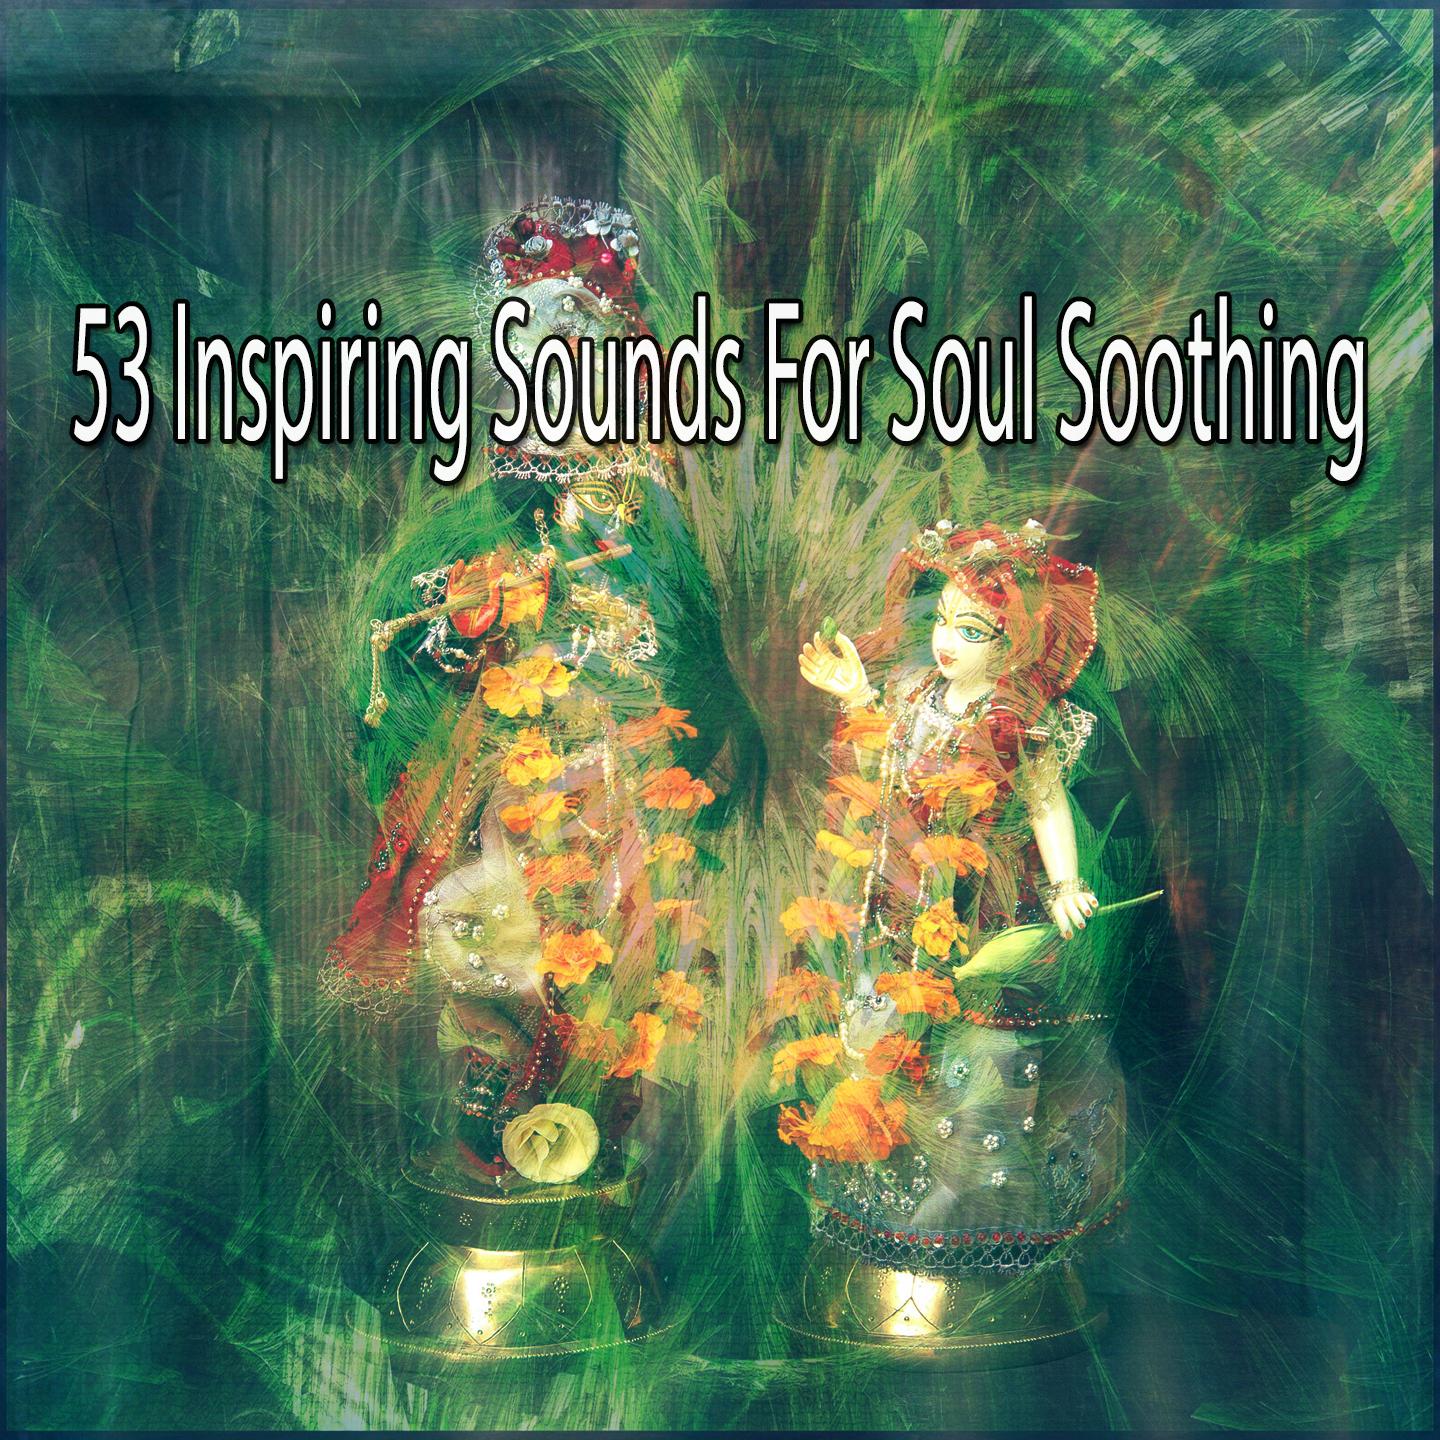 53 Inspiring Sounds for Soul Soothing